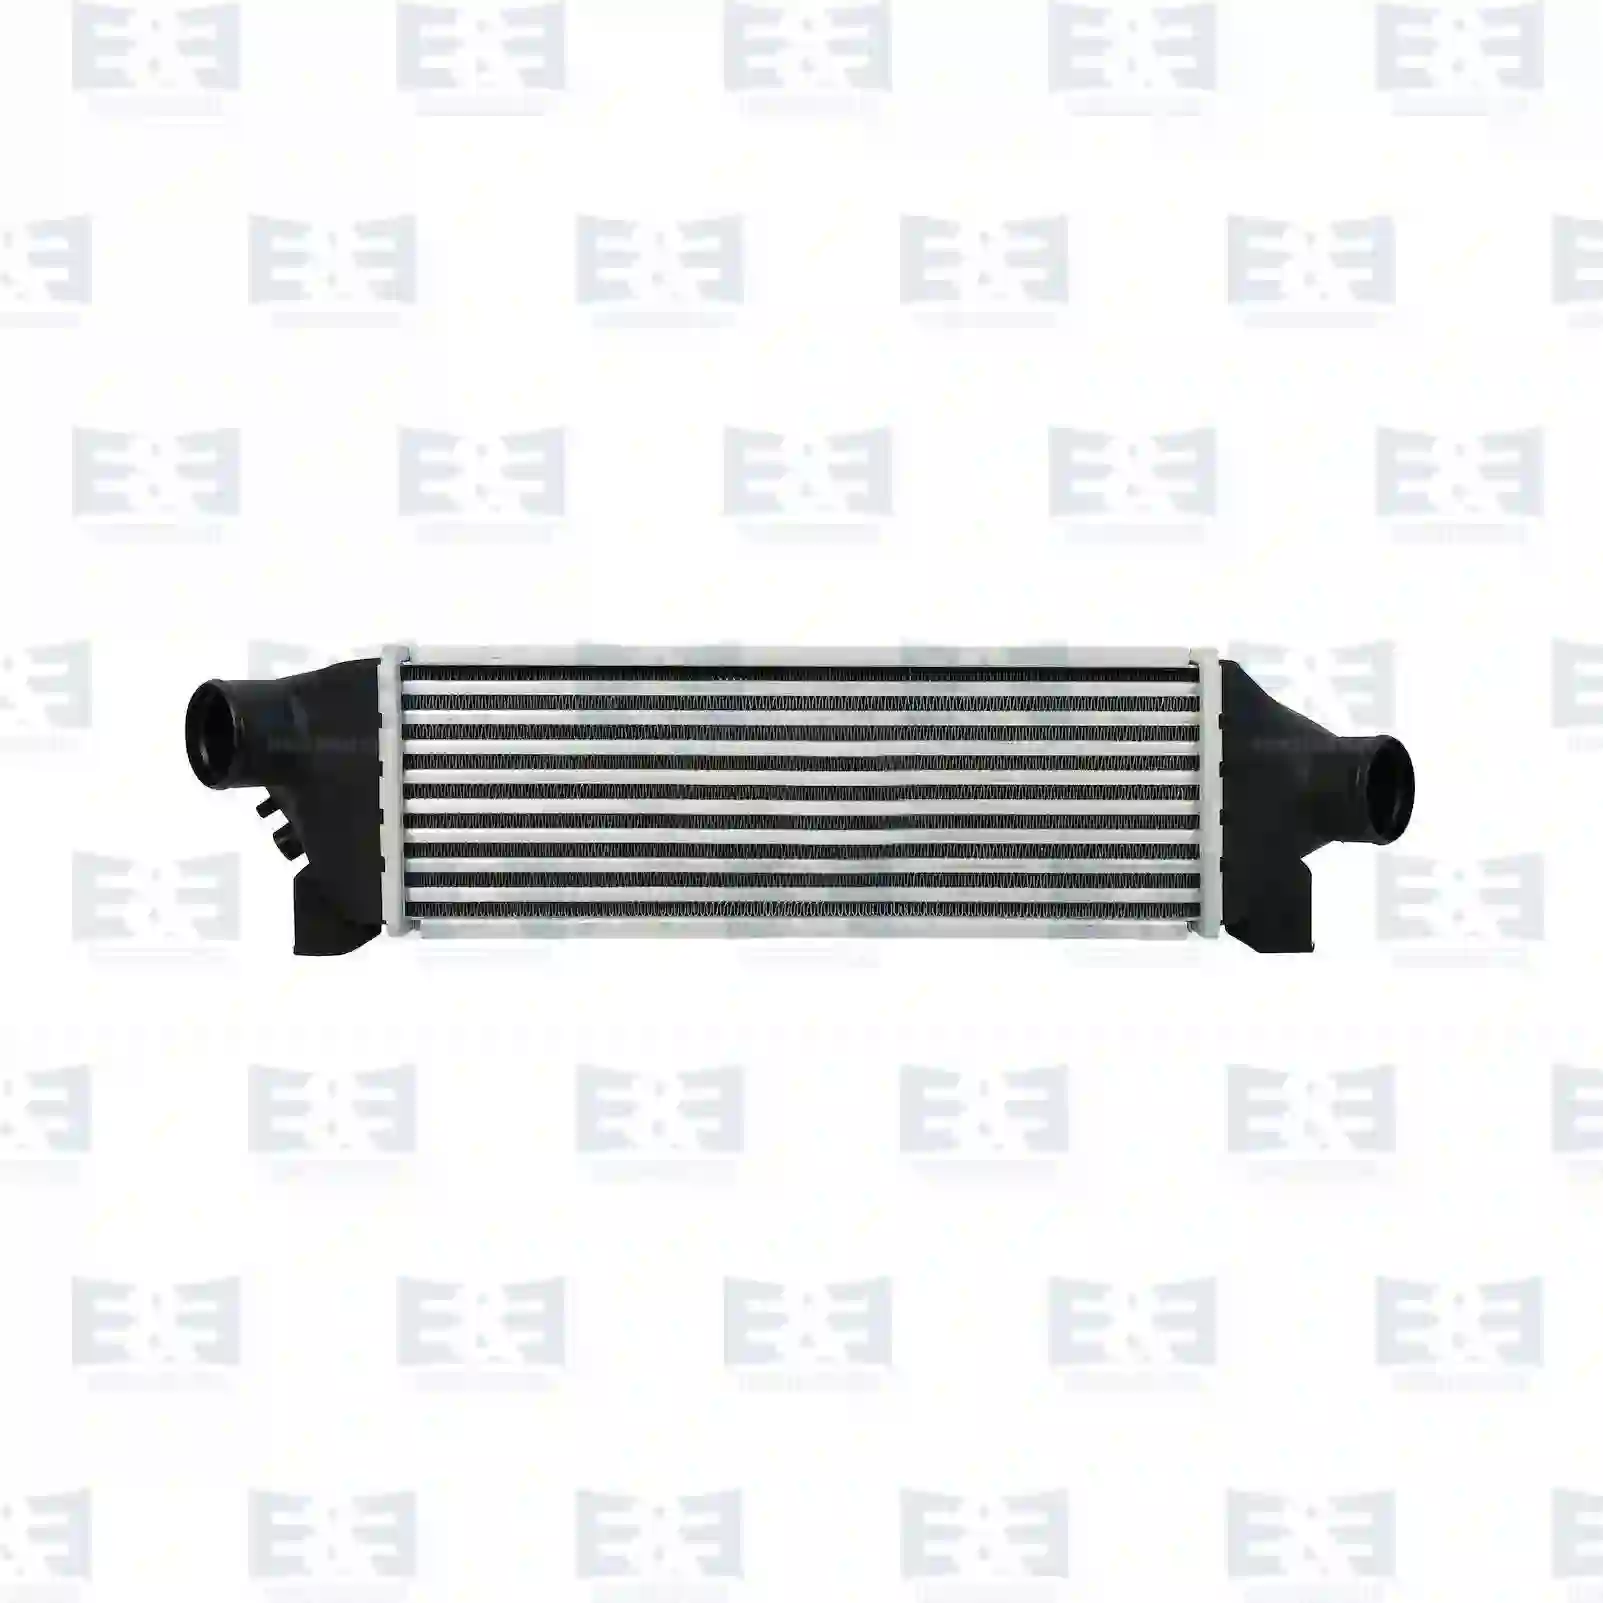 Intercooler, 2E2203727, 1671443, 1C15-9L440-BA, 1C15-9L440-BB, 1C15-9L440-BD, 1C15-9L440-BE, 4126928, 4189069, 4397252, 4522847 ||  2E2203727 E&E Truck Spare Parts | Truck Spare Parts, Auotomotive Spare Parts Intercooler, 2E2203727, 1671443, 1C15-9L440-BA, 1C15-9L440-BB, 1C15-9L440-BD, 1C15-9L440-BE, 4126928, 4189069, 4397252, 4522847 ||  2E2203727 E&E Truck Spare Parts | Truck Spare Parts, Auotomotive Spare Parts